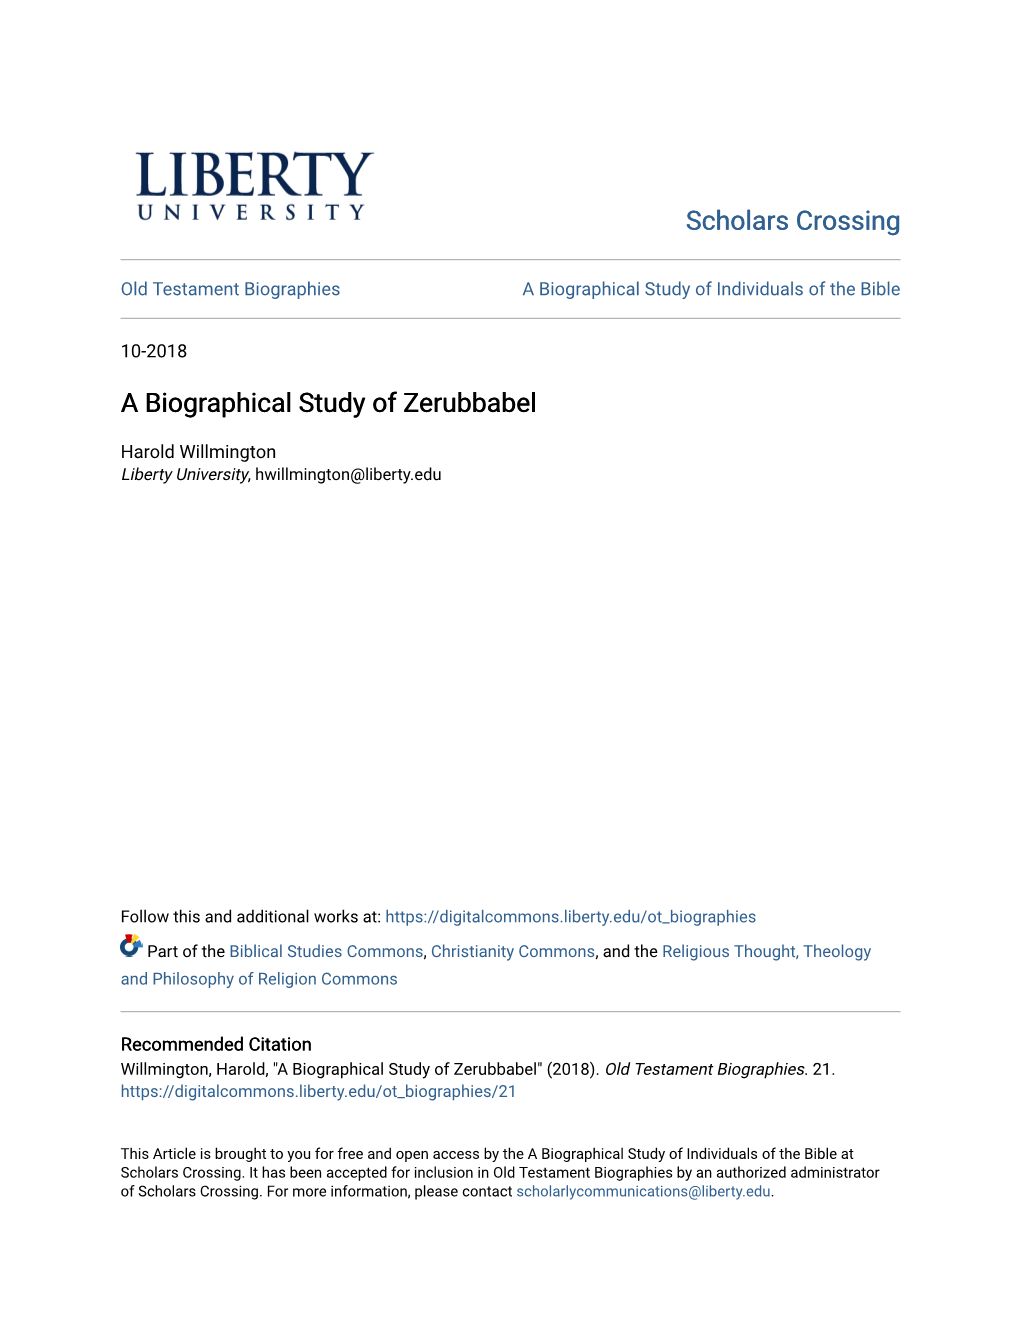 A Biographical Study of Zerubbabel